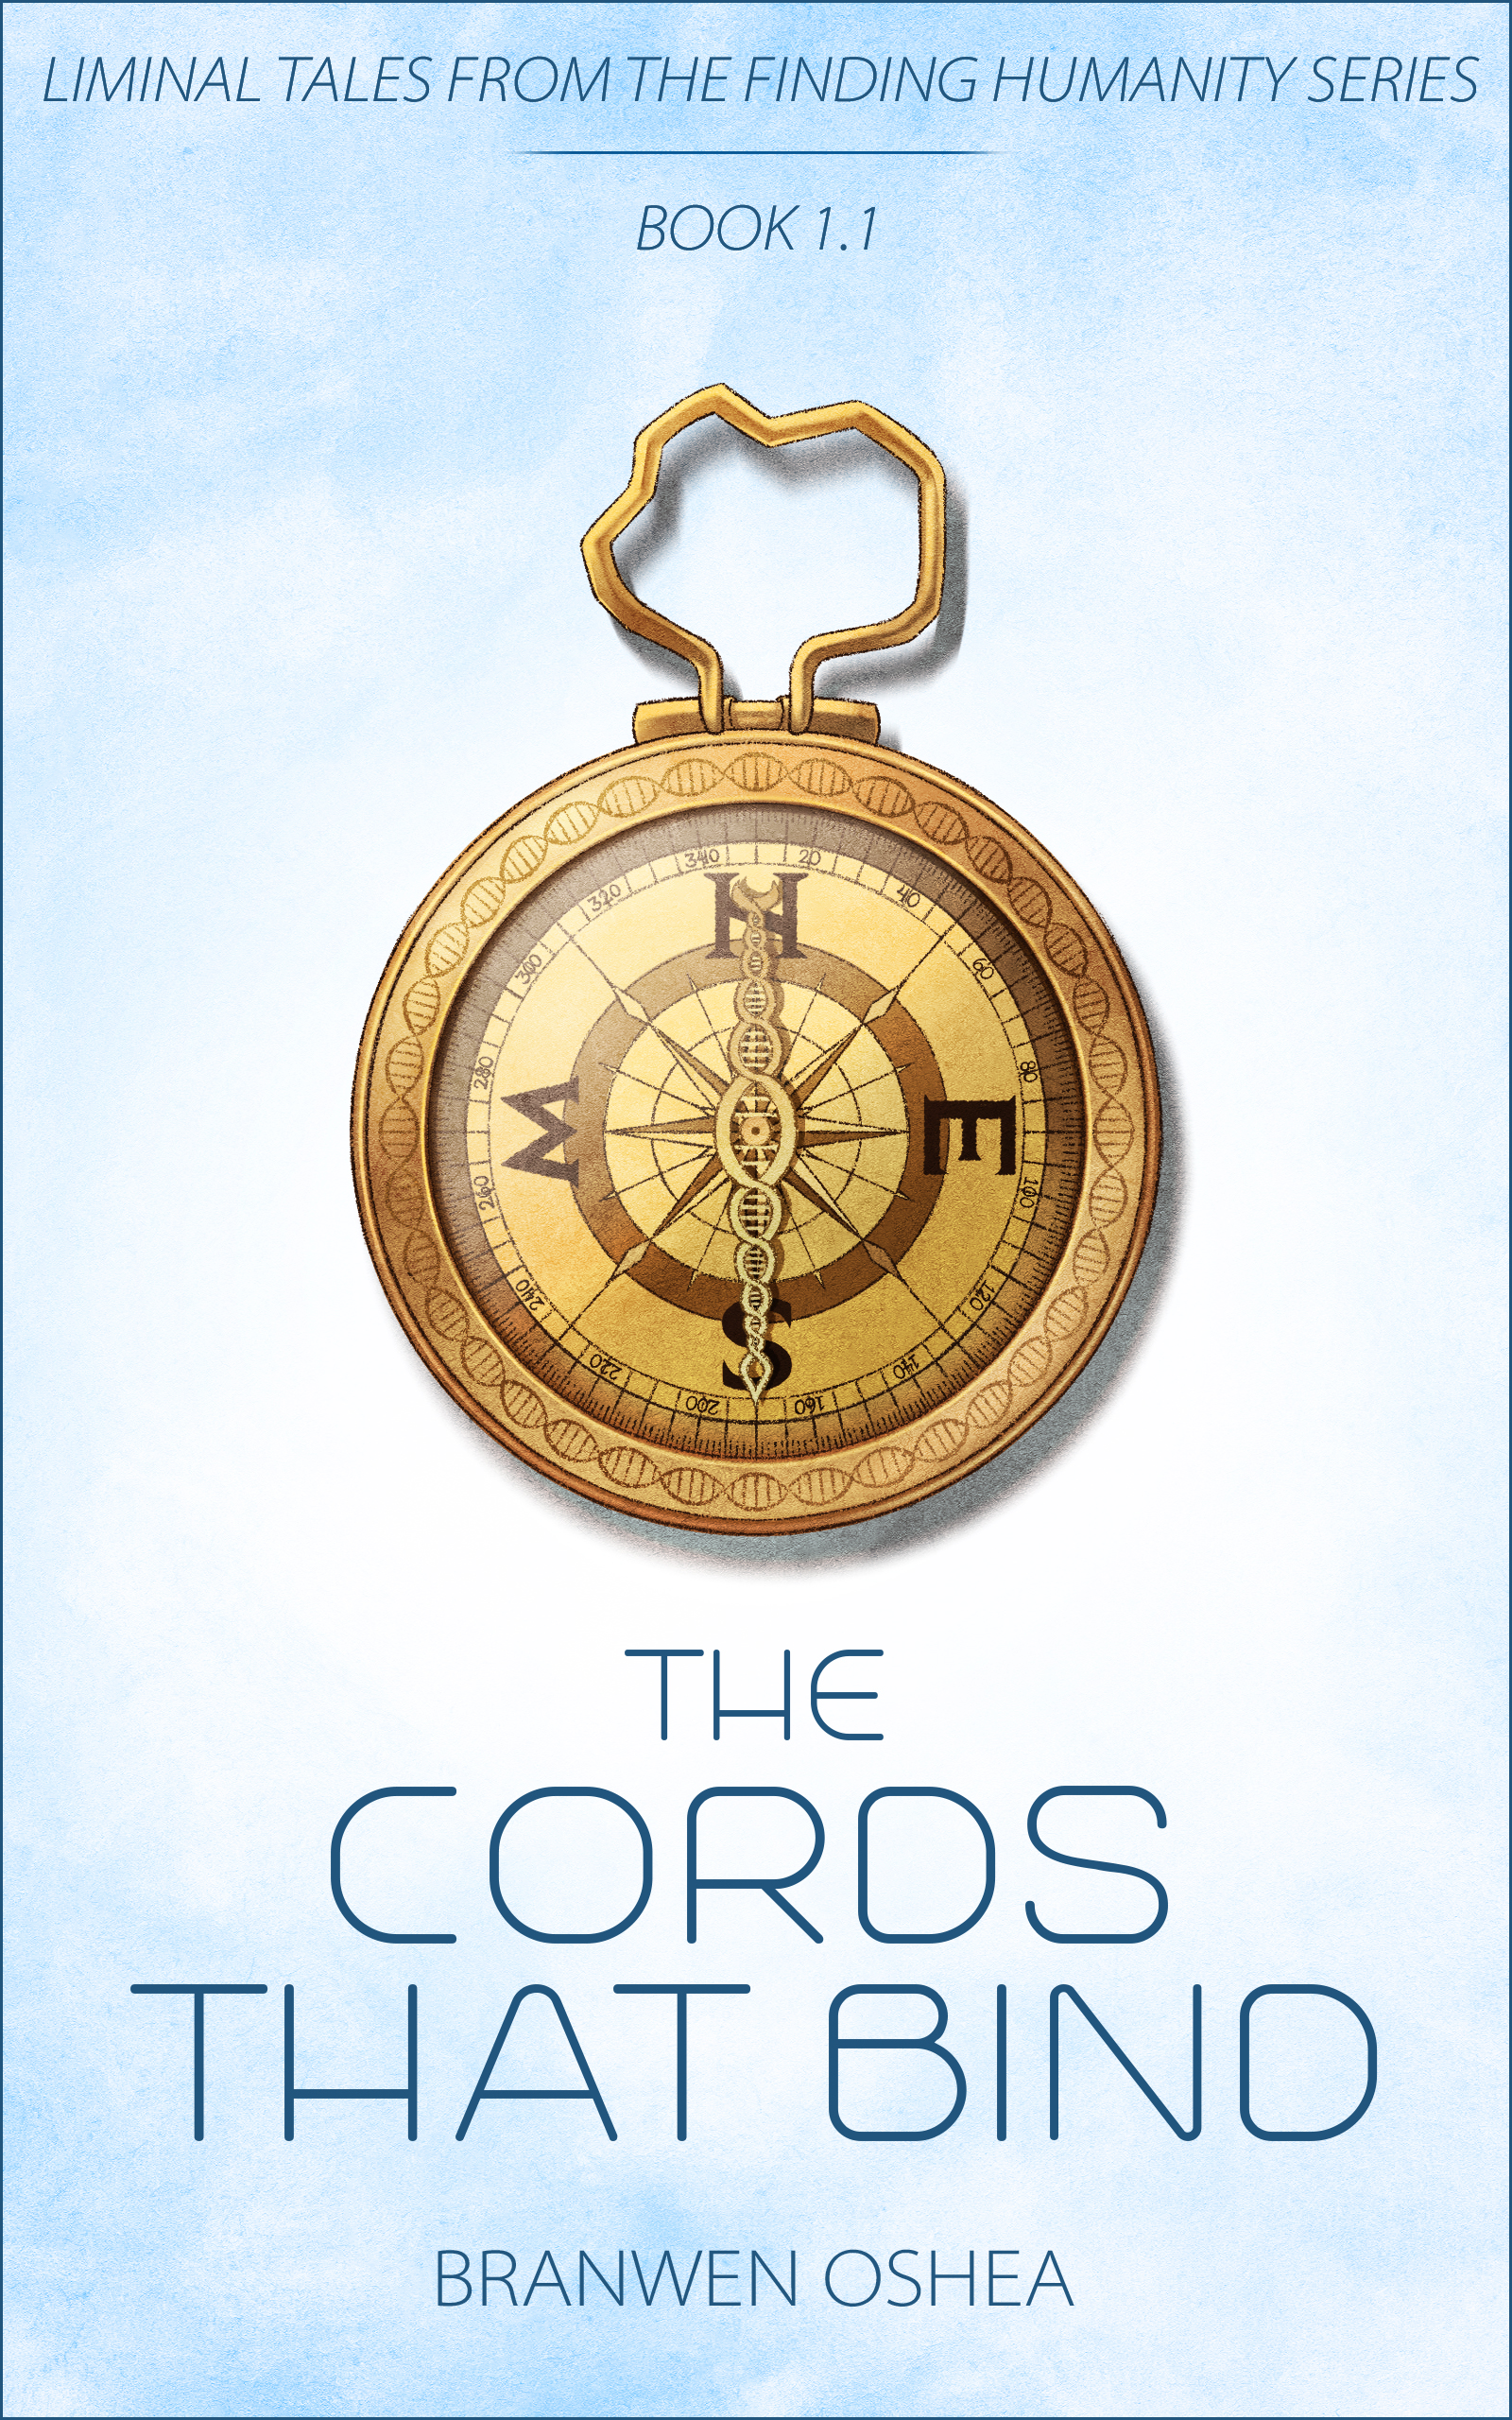 The Cords That Bind - Liminal Tales From The Finding Humanity Series. Book 1.1 by Branwen Oshea. A pale blue background indicative of ice and cold with a yellow compass. 